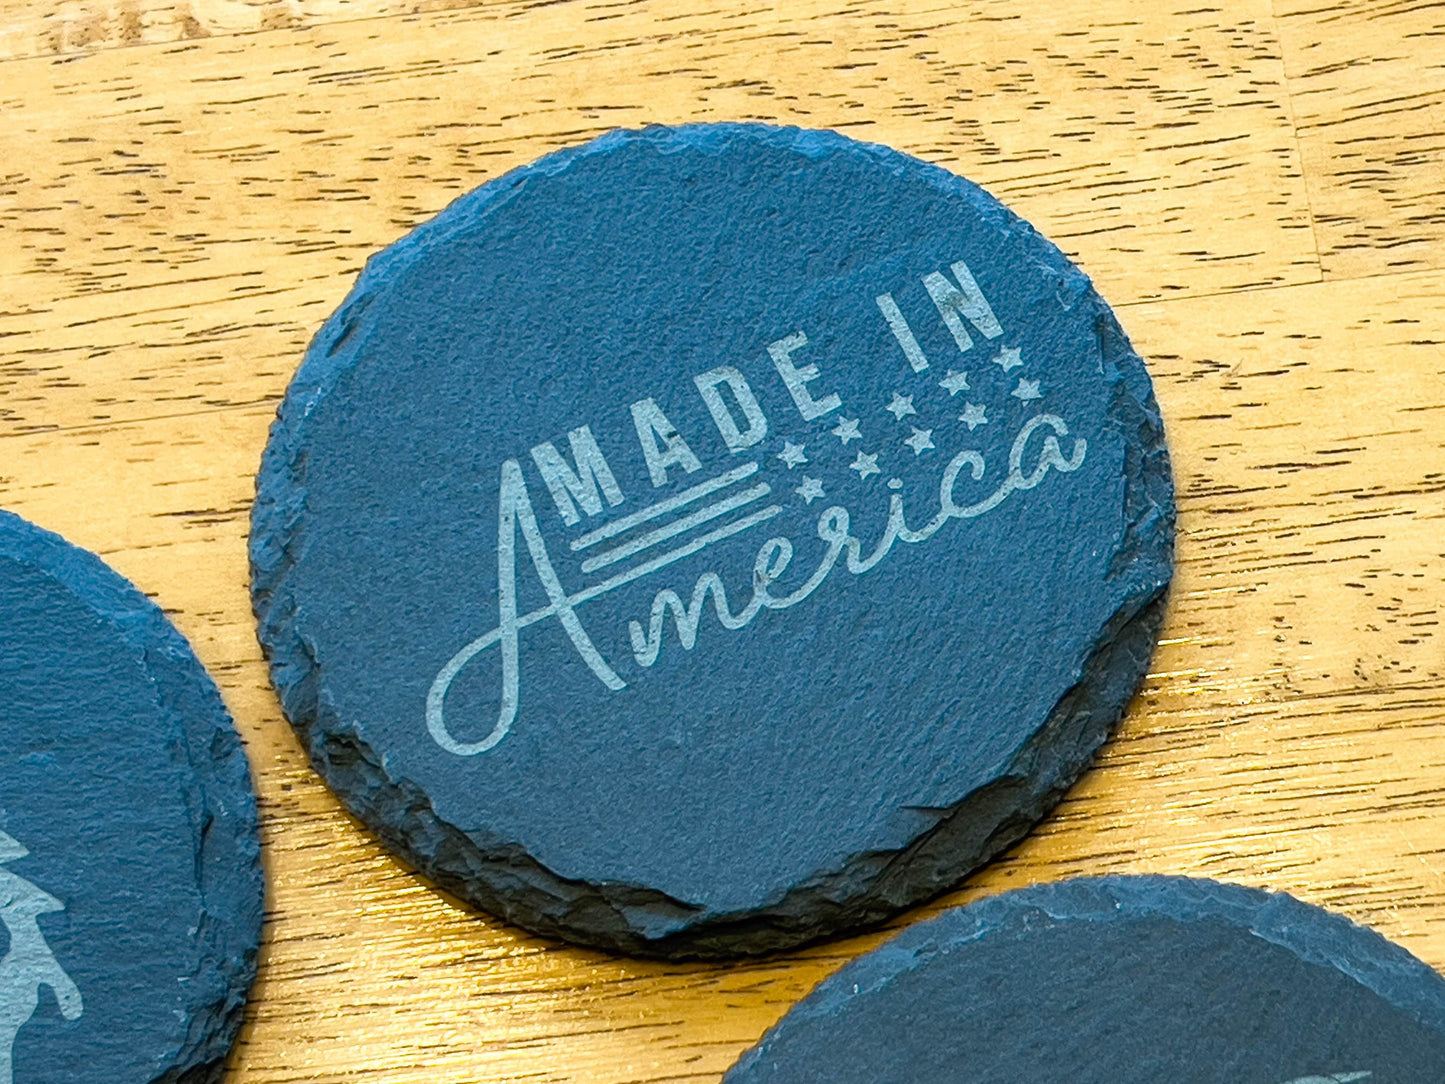 Set of 4 American-themed laser-engraved slate drink coasters